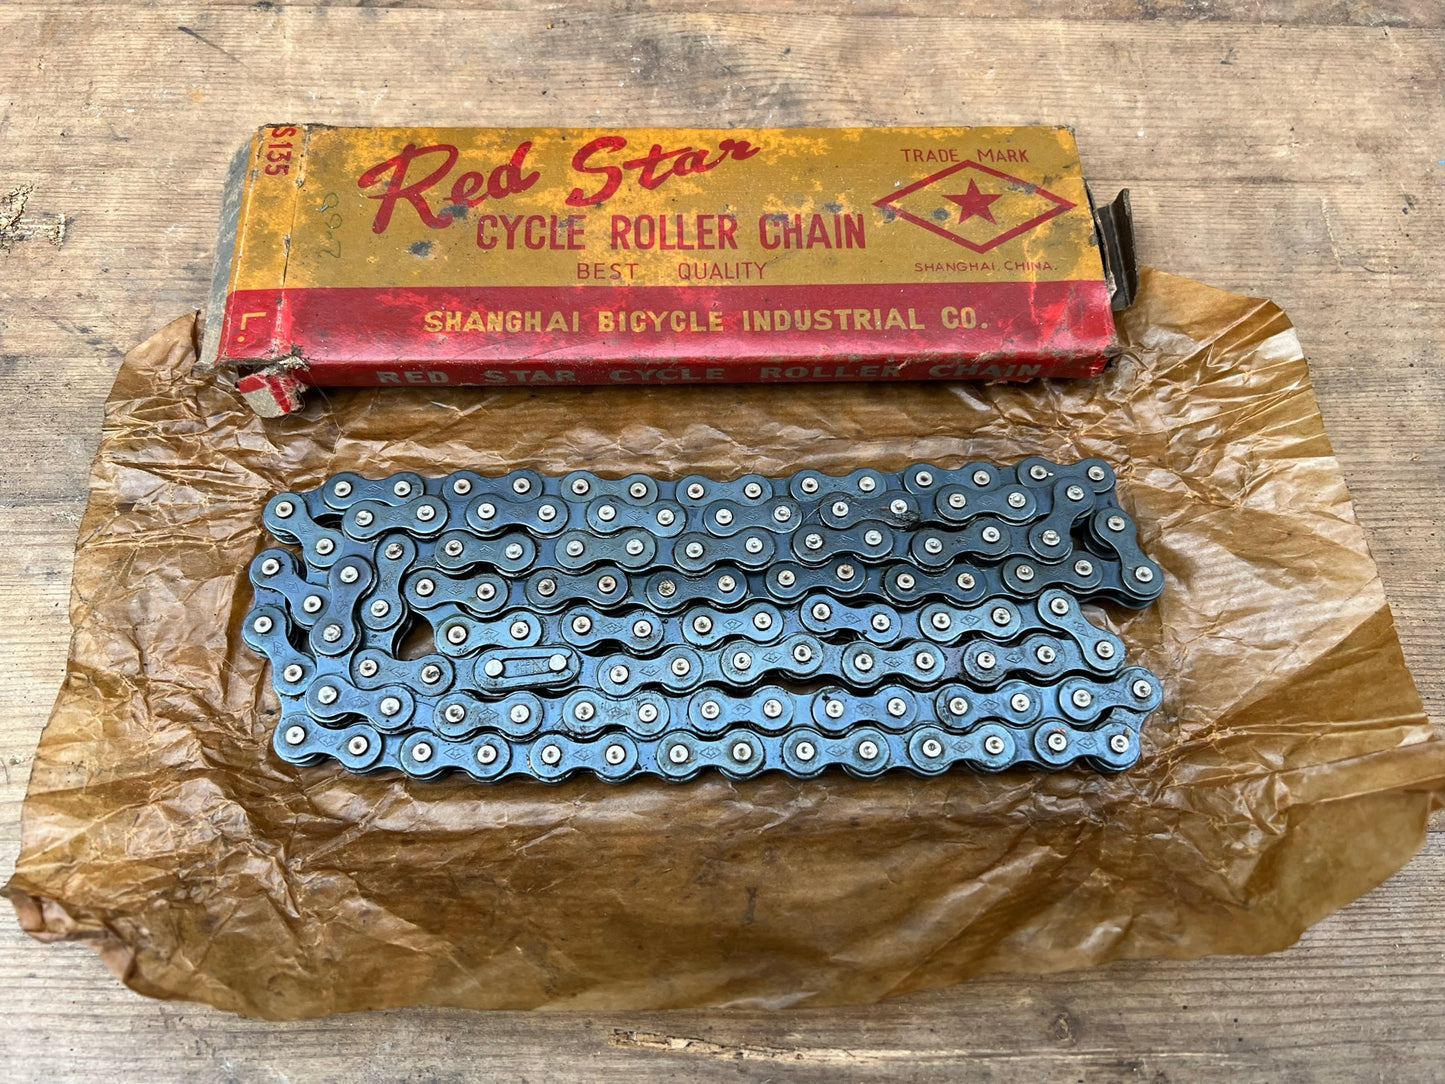 Vintage Bicycle Cycle Chain In Original Box Red Star Brand 1/2"x1/8"